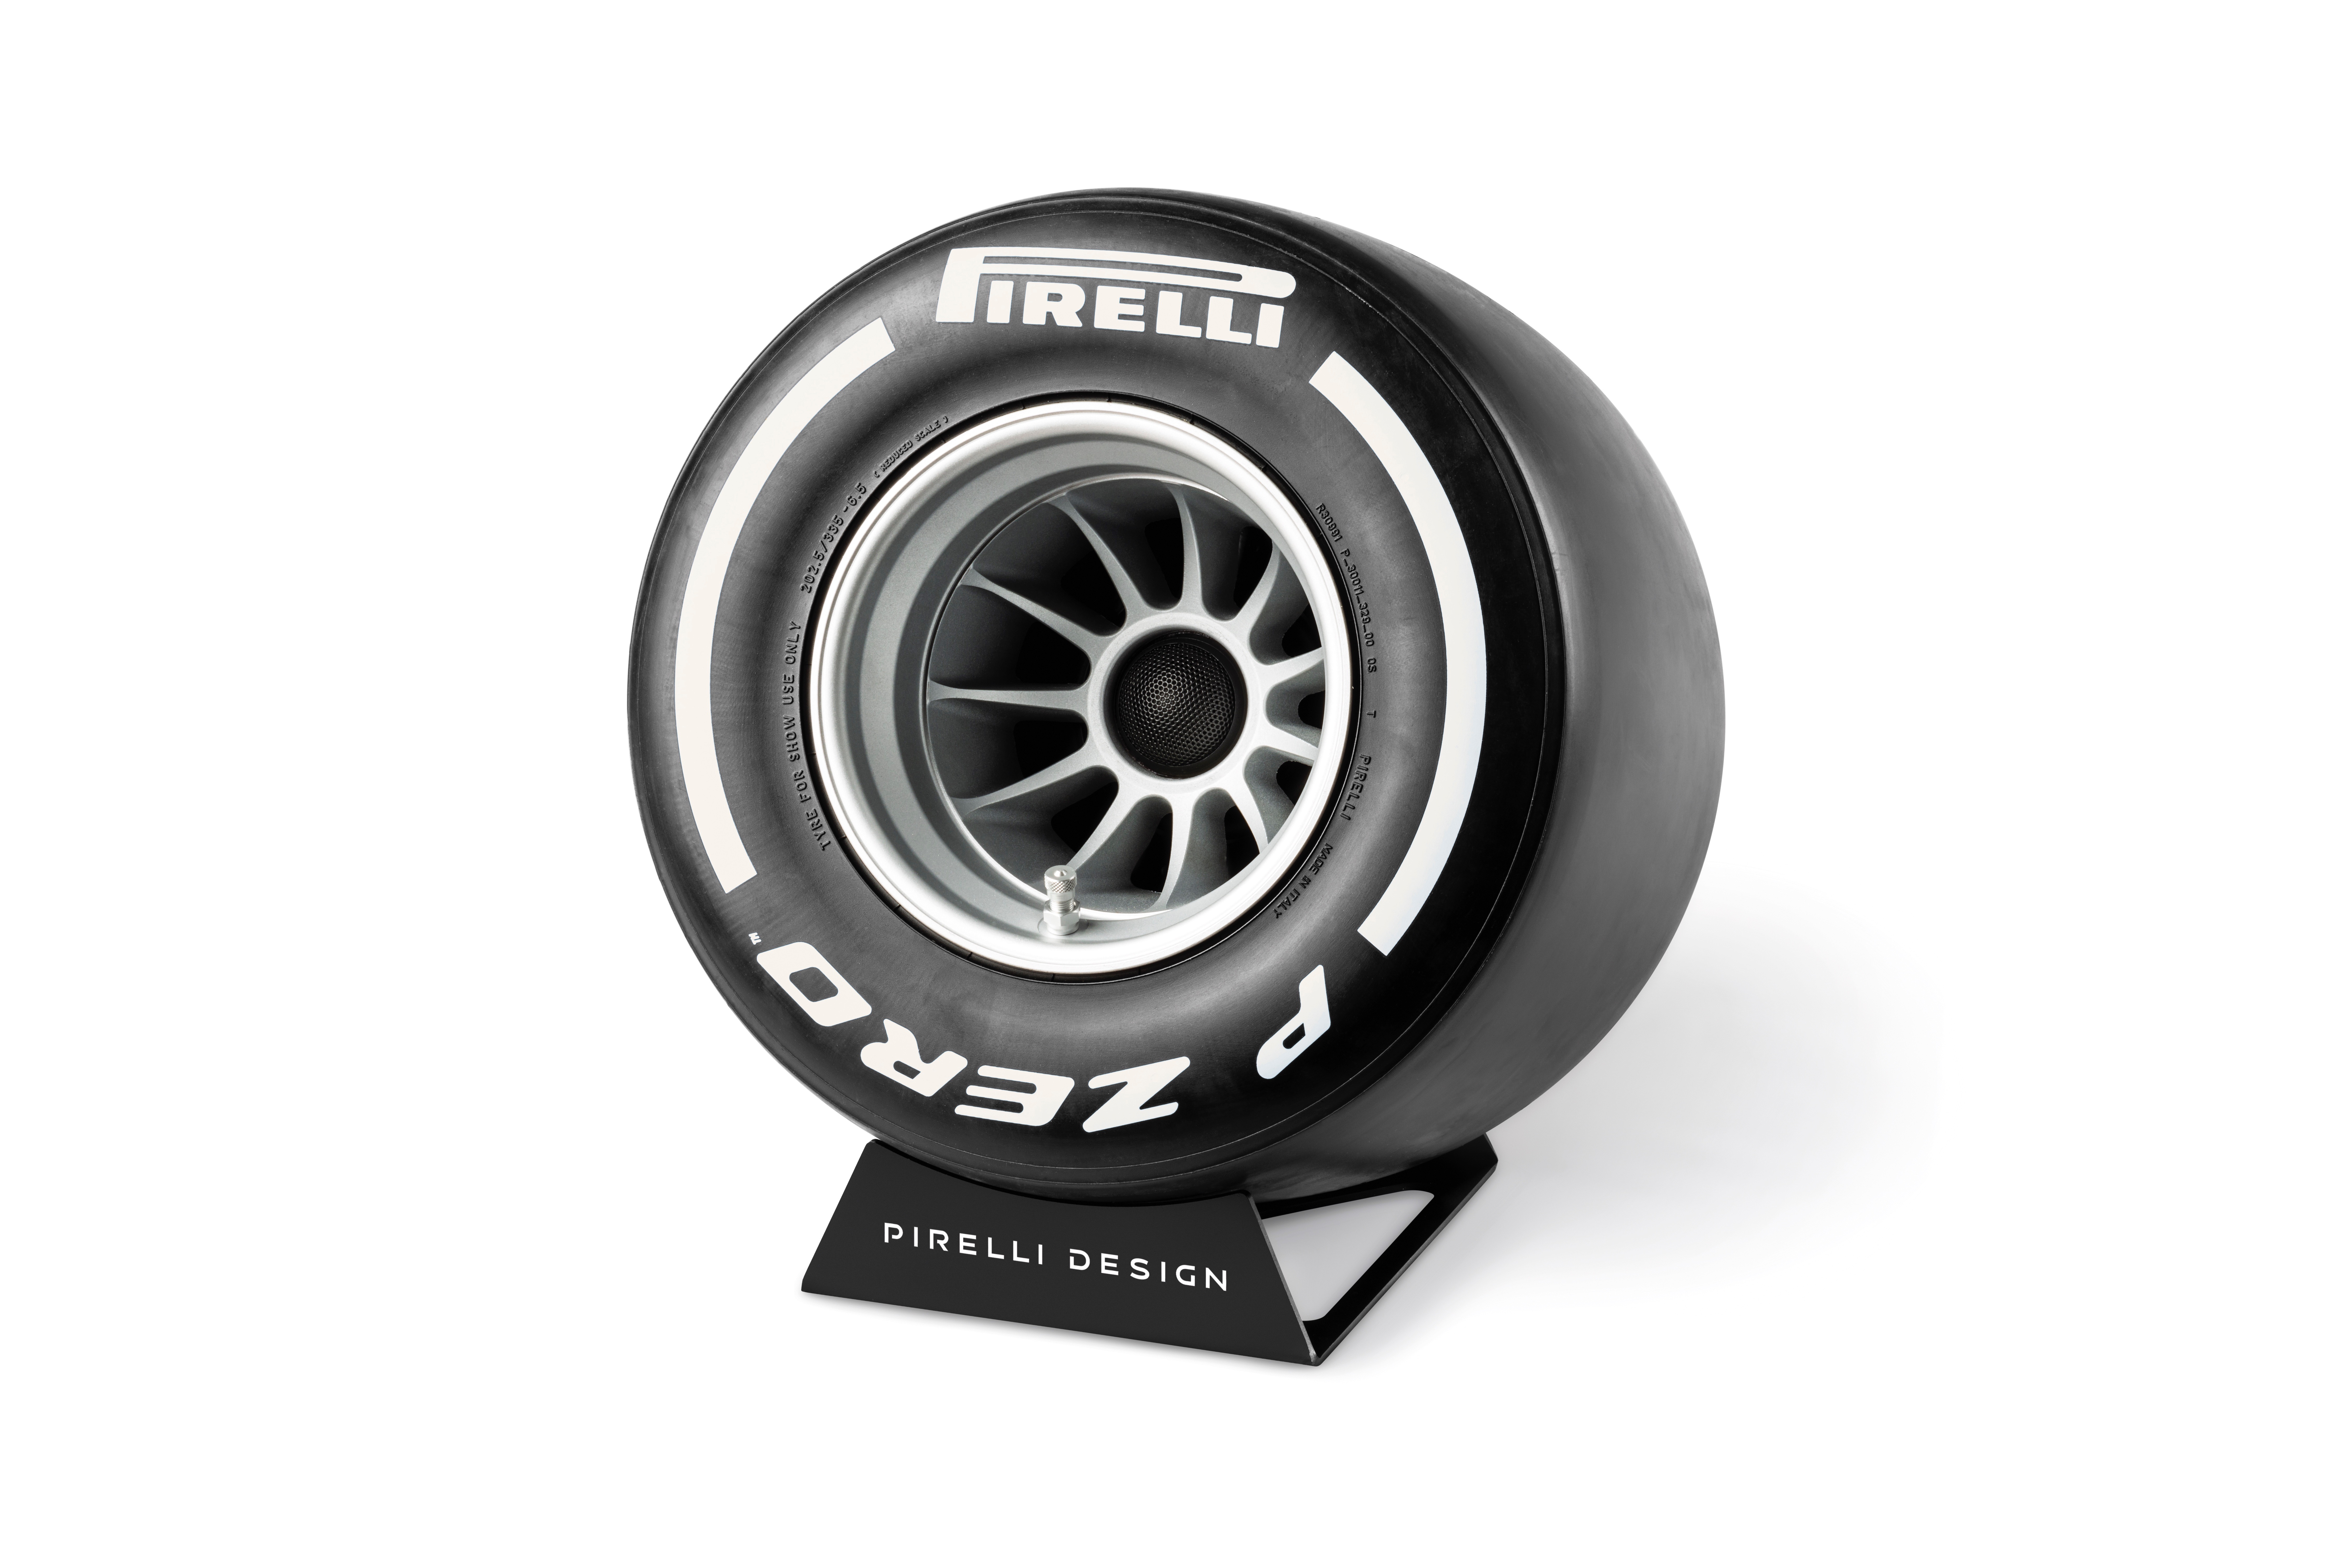 Pirelli Design, F1 racing technology available in new sound system, ClassicCars.com Journal